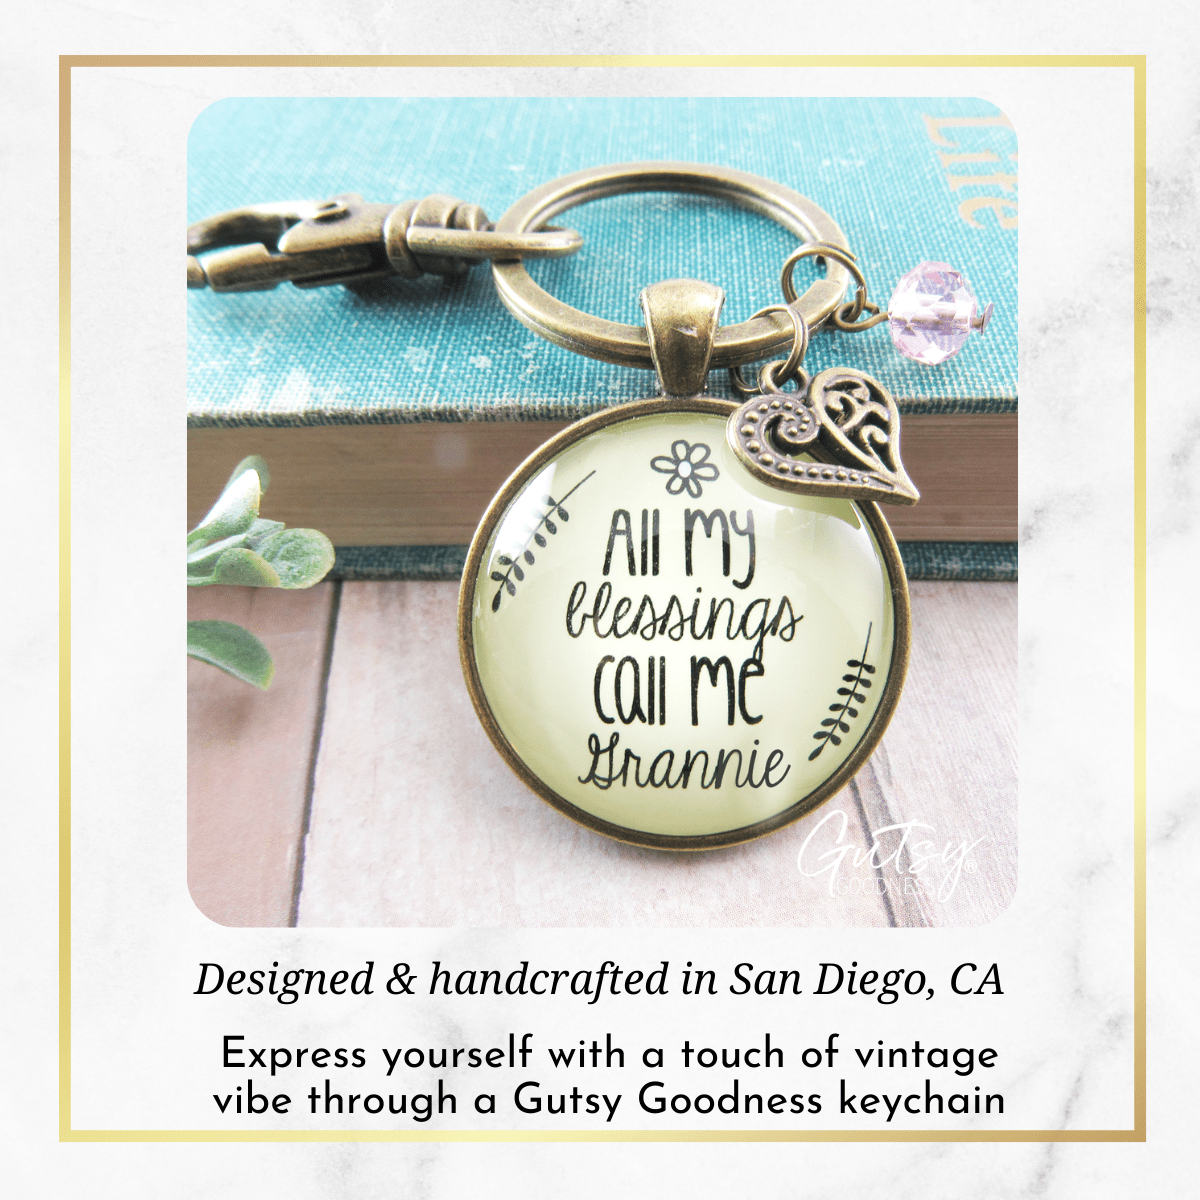 Grannie Keychain All My Blessings Meaningful Grandma Womens Family Gift Jewelry - Gutsy Goodness Handmade Jewelry;Grannie Keychain All My Blessings Meaningful Grandma Womens Family Gift Jewelry - Gutsy Goodness Handmade Jewelry Gifts